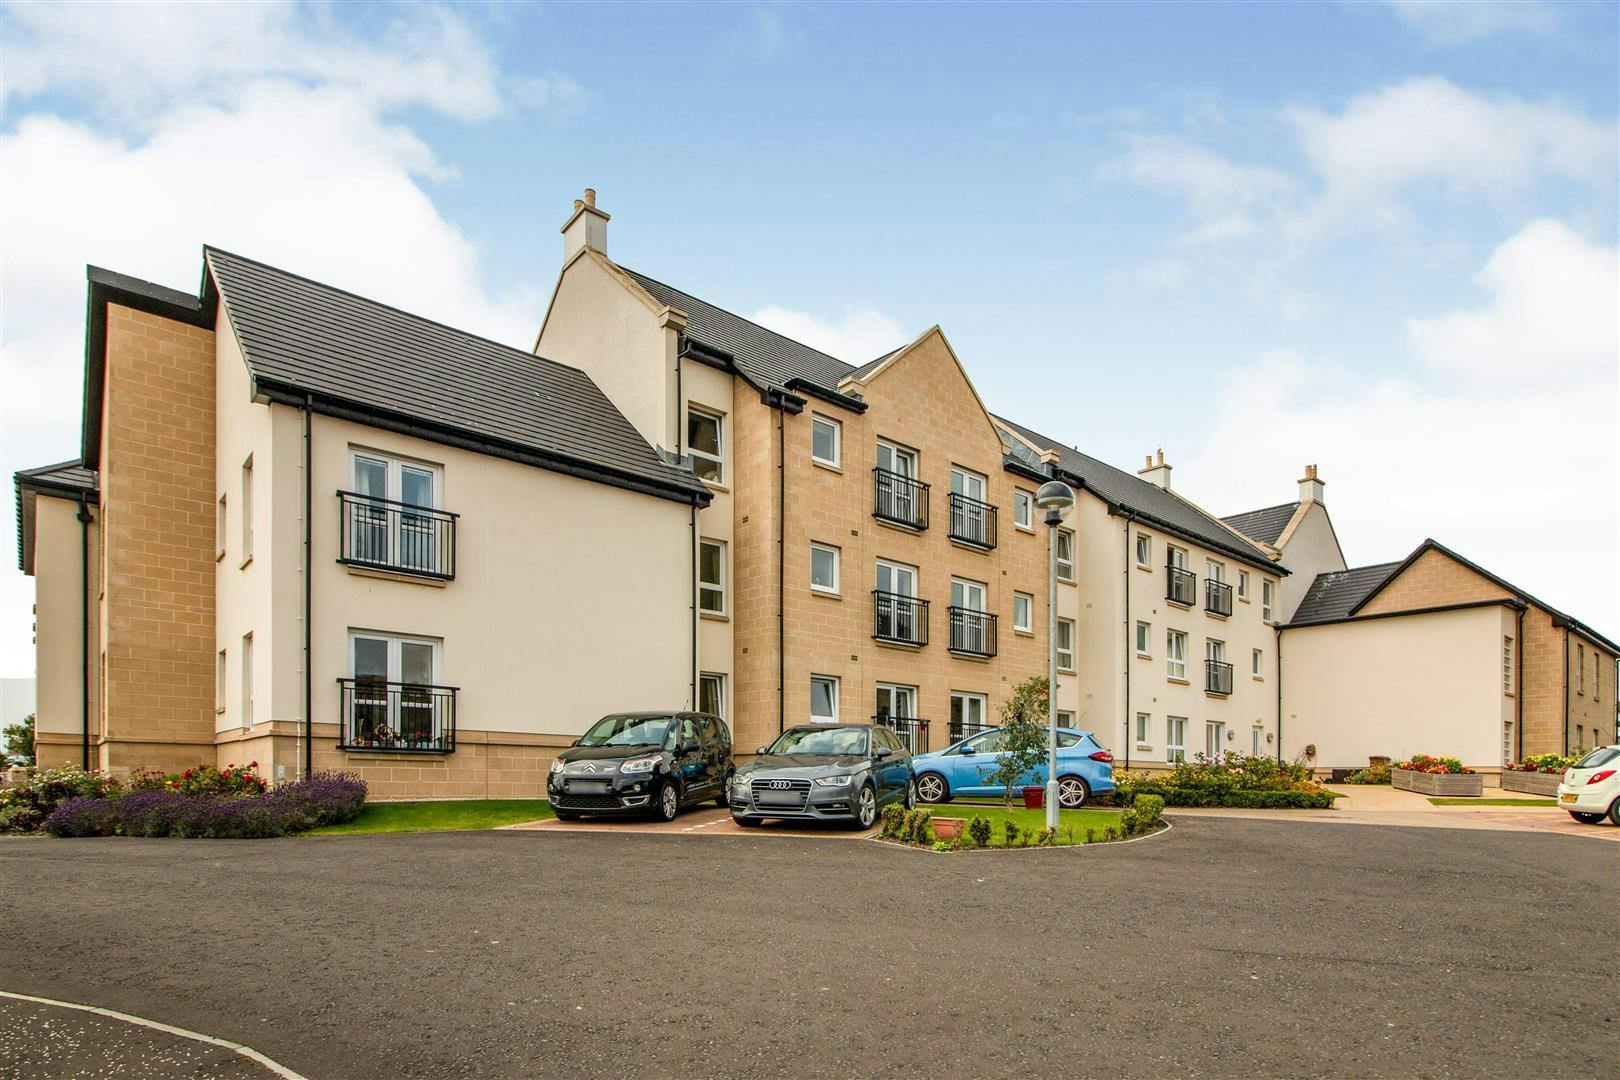 Exterior of Beacon Court Retirement Development in Anstruther, Fife